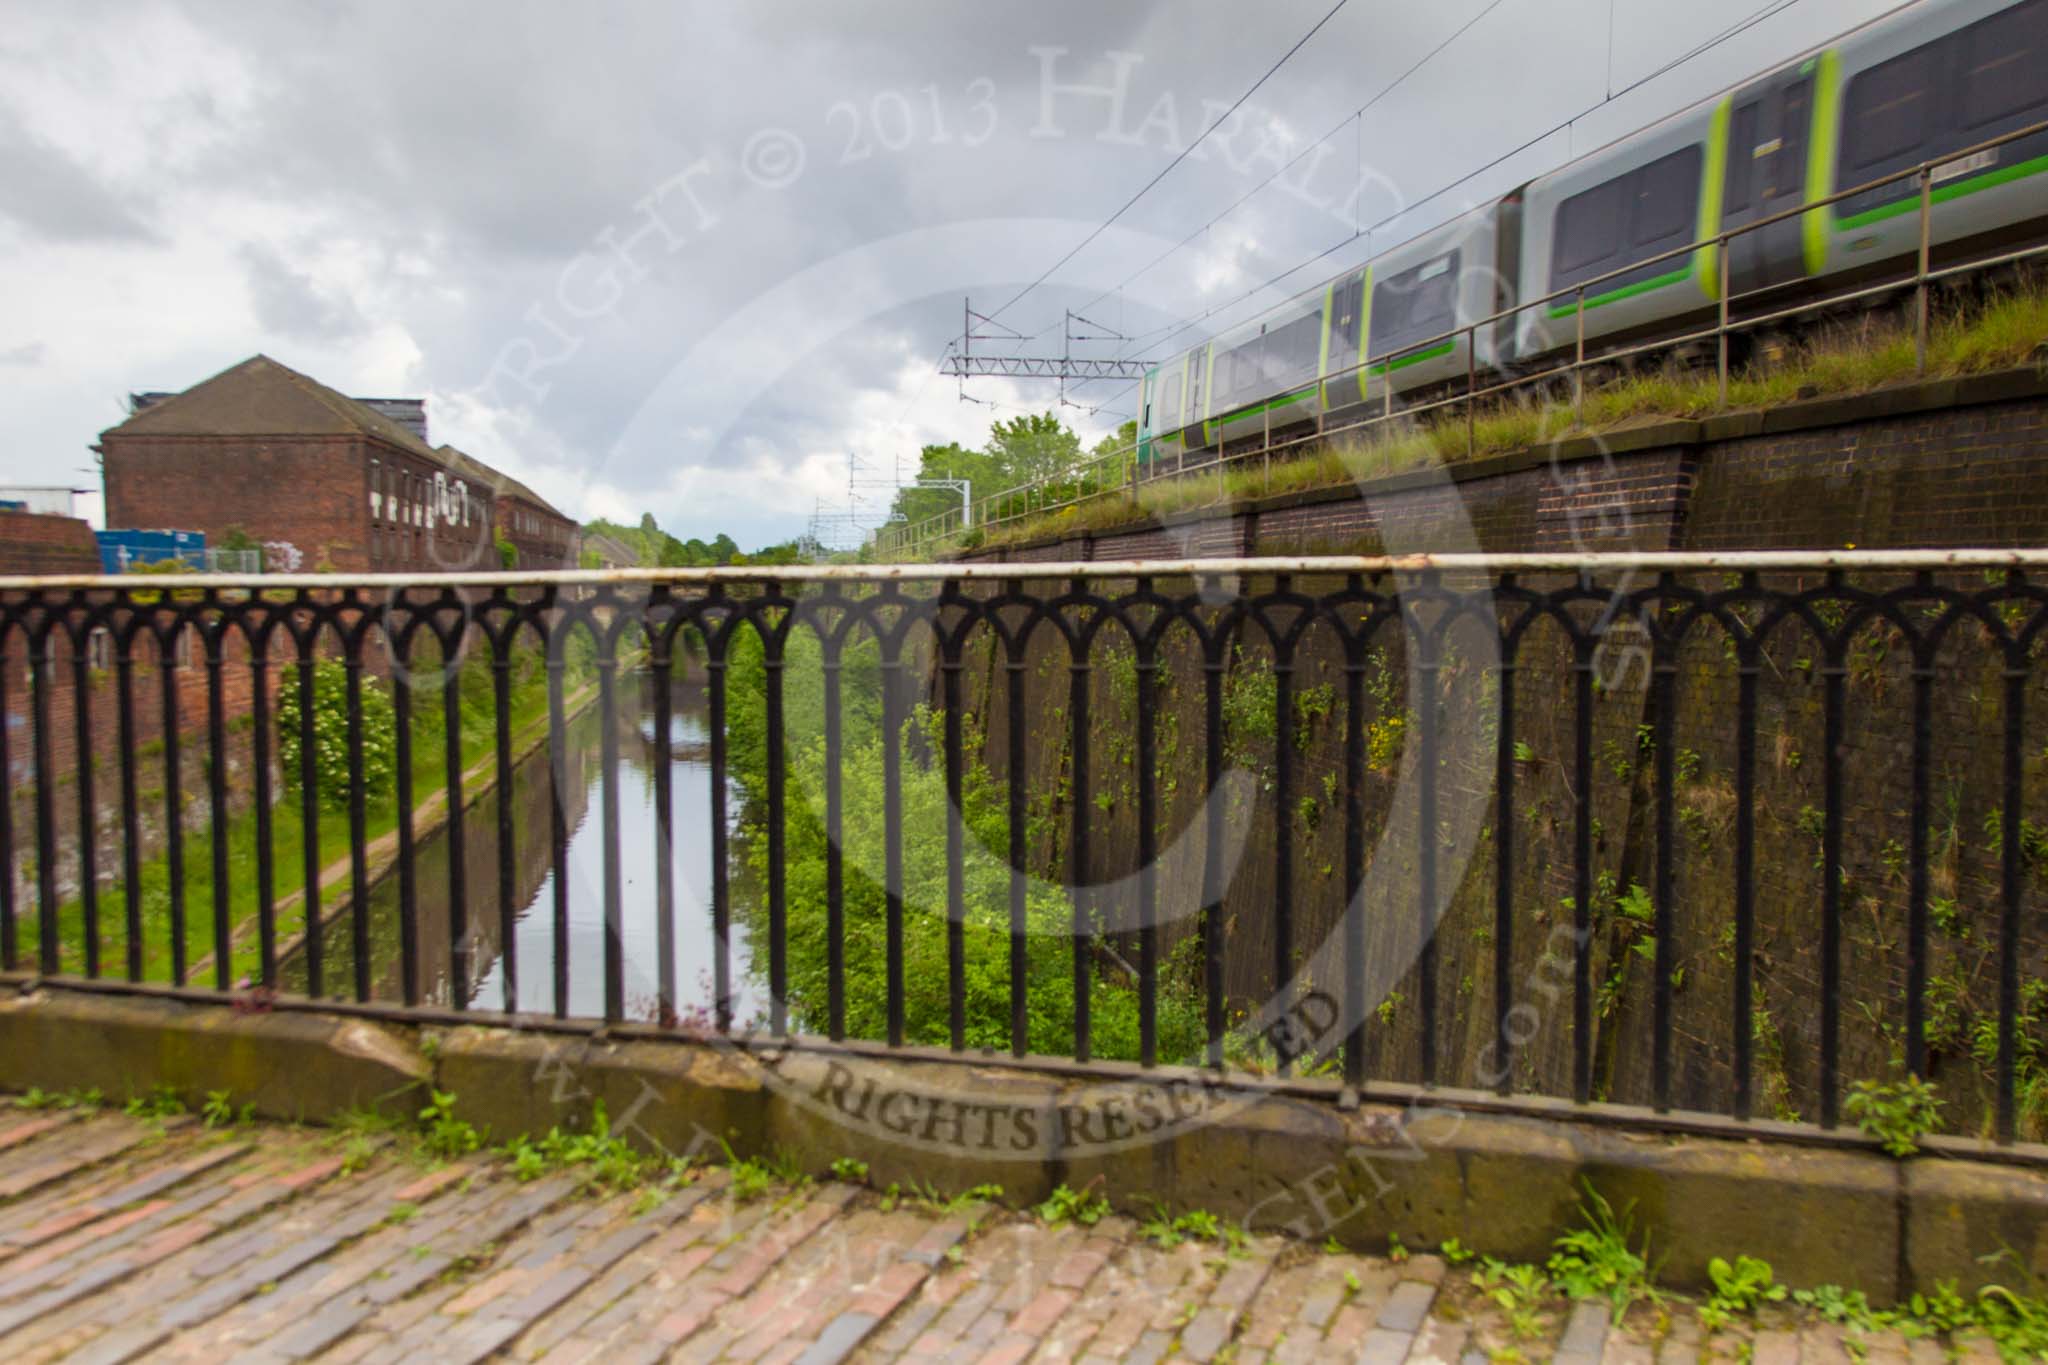 BCN Marathon Challenge 2014: Looking down from the Old Main Line to the New Main Line at Stewart Aqueduct.
Birmingham Canal Navigation,


United Kingdom,
on 24 May 2014 at 18:10, image #178